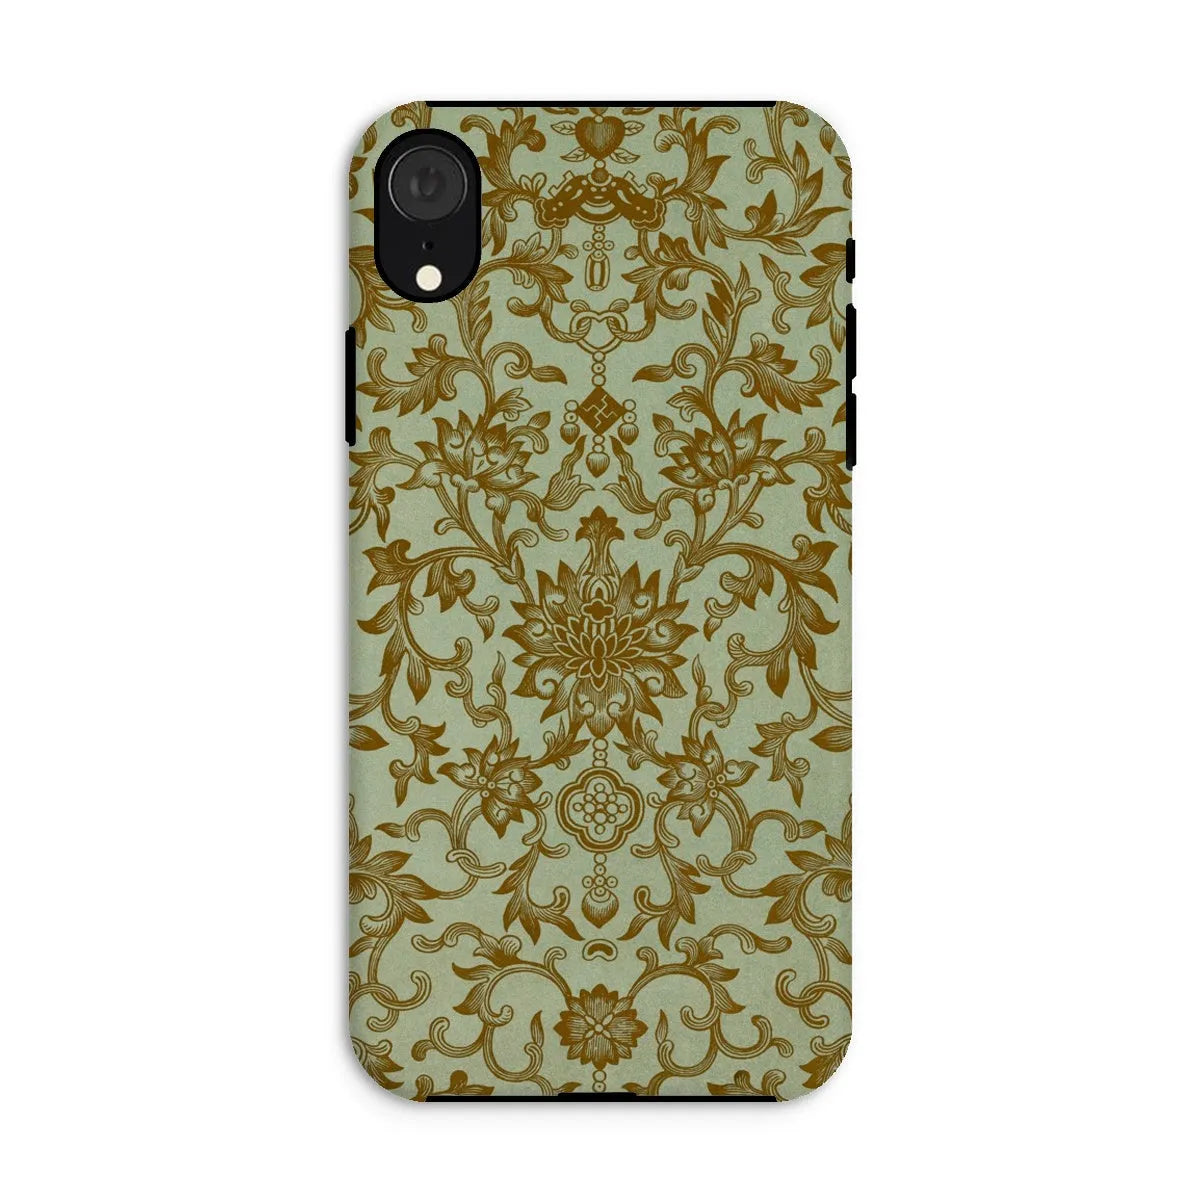 Earthy Chinese Floral Art Pattern Phone Case - Owen Jones - Iphone Xr / Matte - Mobile Phone Cases - Aesthetic Art